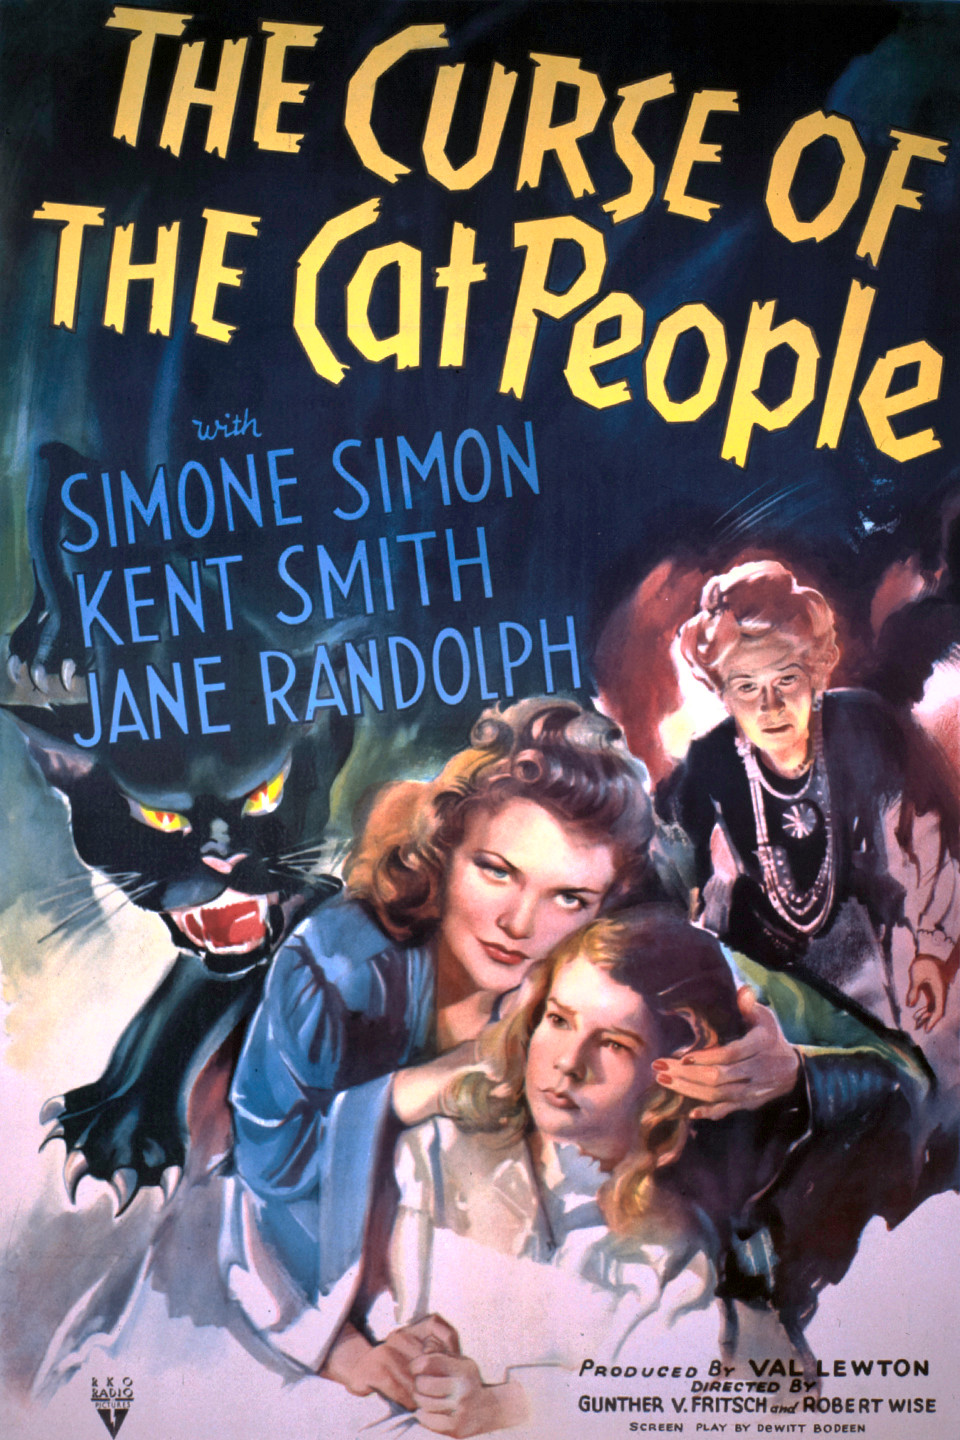 The Curse of The Cat People